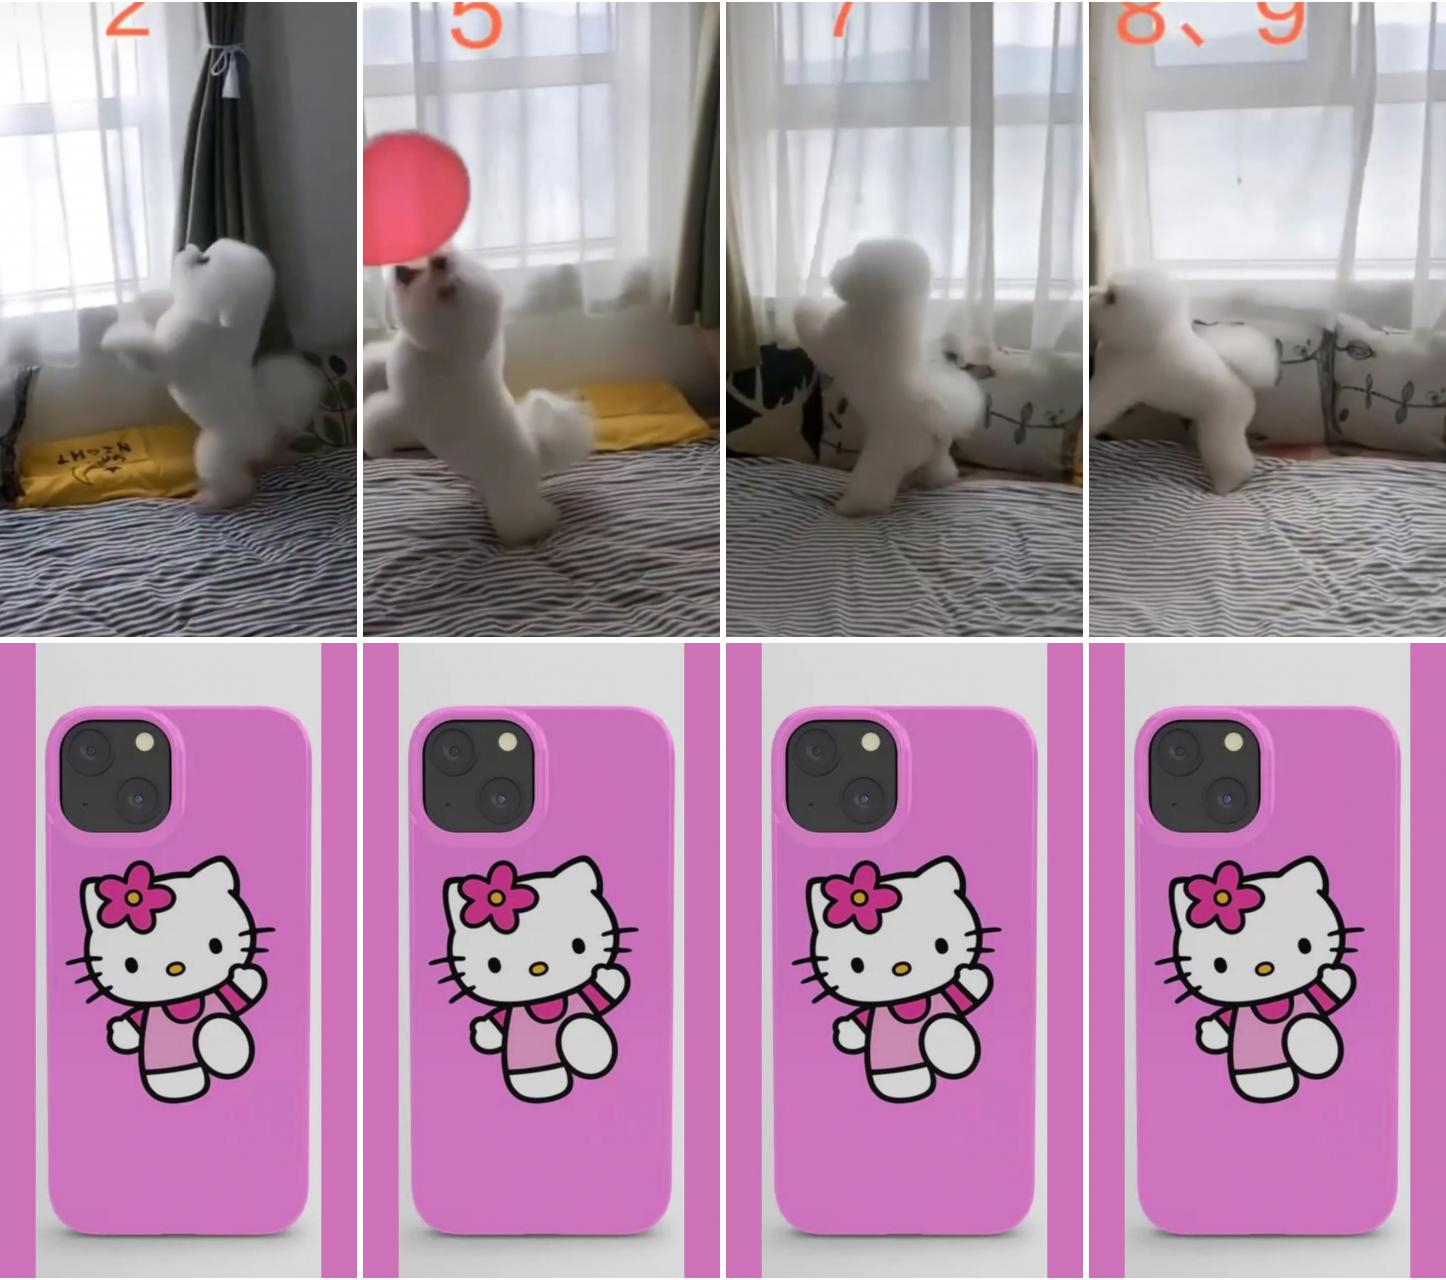 Cute dogs being silly compilation #1; pink hello kitty iphone case